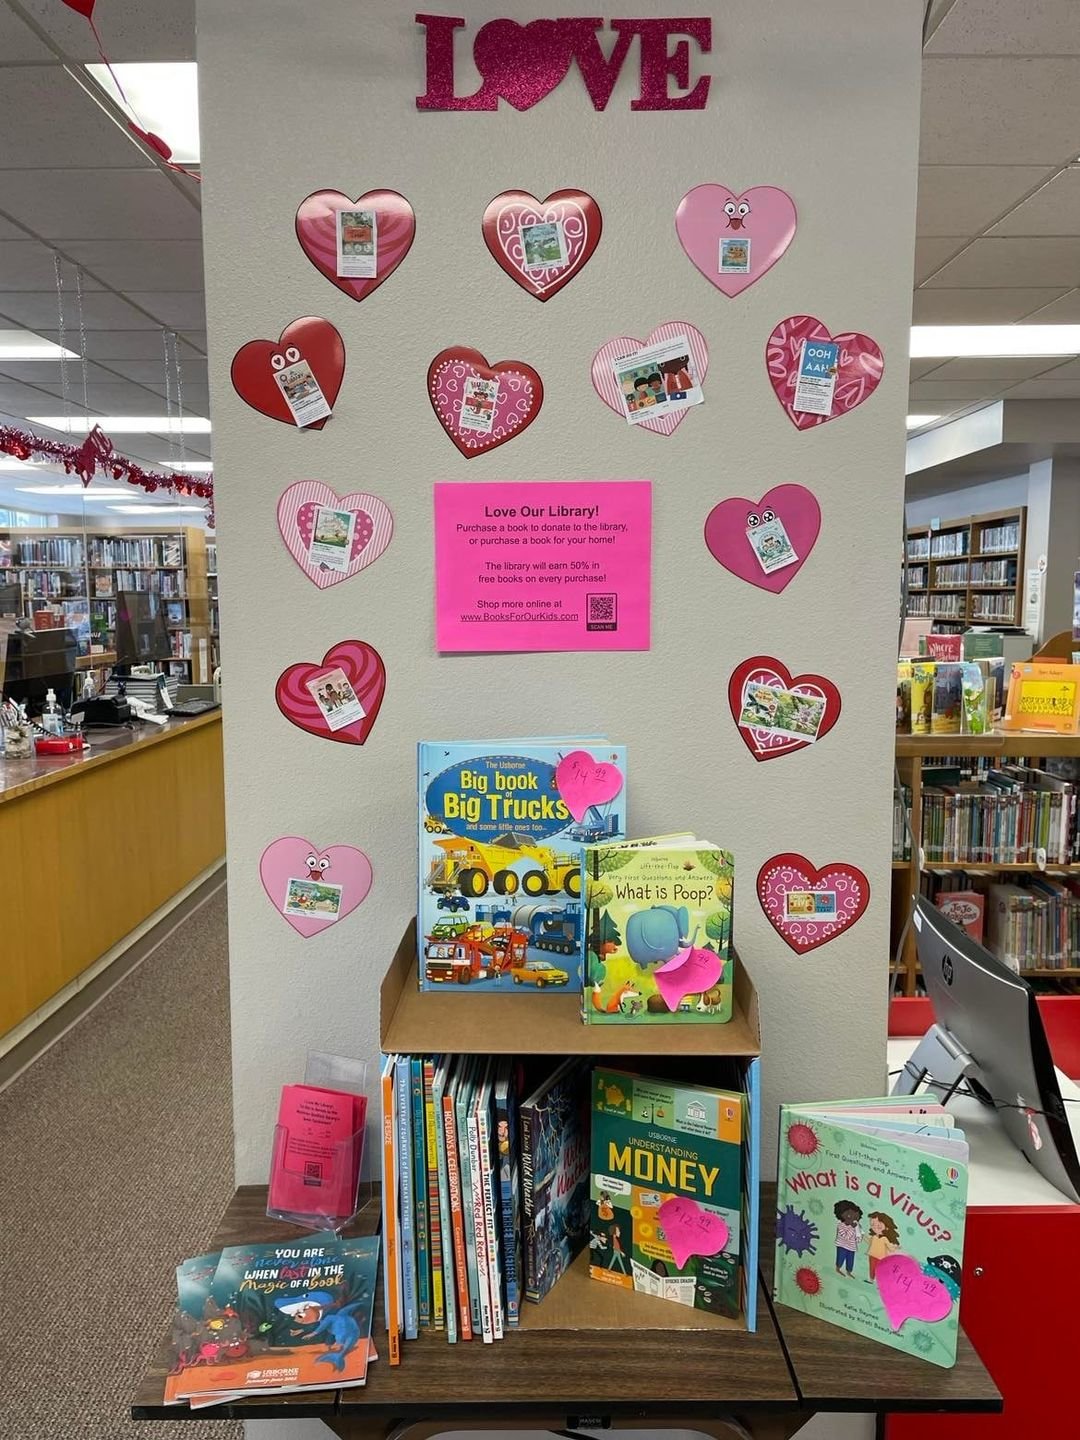 The Love Your Library campaign gives donors three ways to contribute to the Wellman-Scofield Public Library’s fundraising campaign.